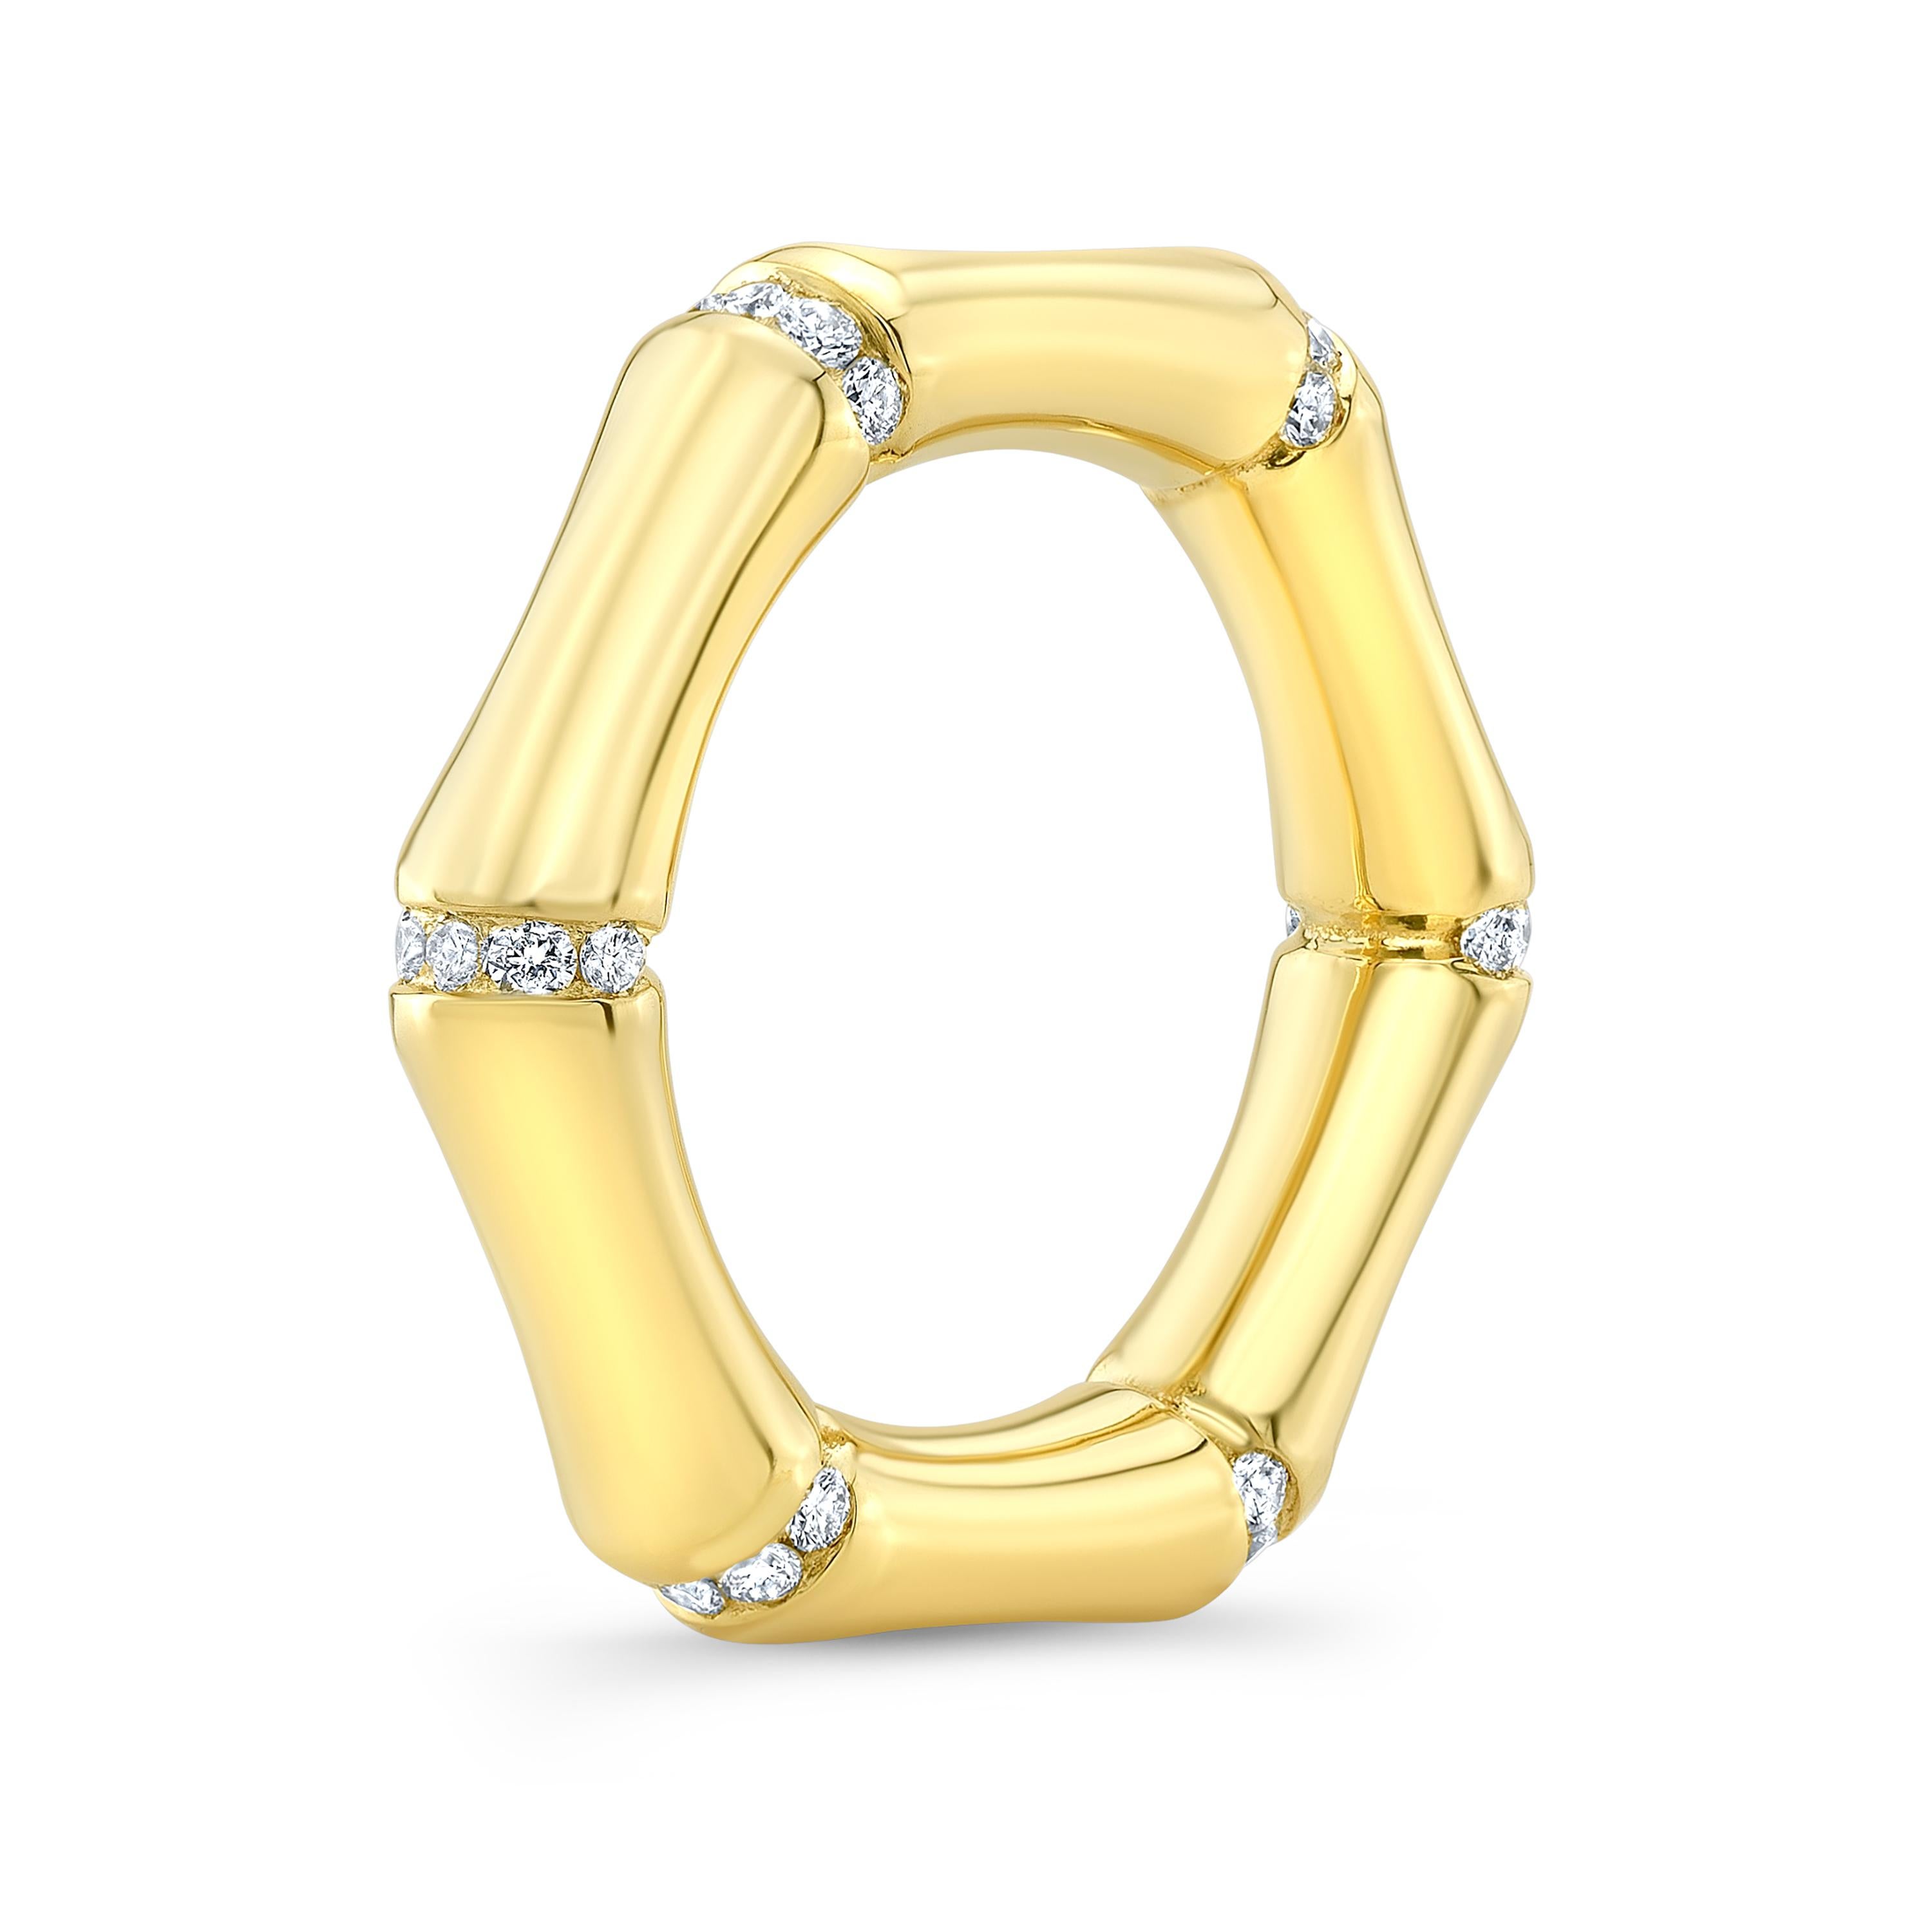 Amy Y's Contemporary handmade 18K-Yellow Gold and diamond Bamboo ring 'Indah,' which means beautiful, is a one-of-a-kind gem. 
Inspired by nature, Amy created this ring for everyday life. Full-cut white diamonds inlaid at the joints add just the